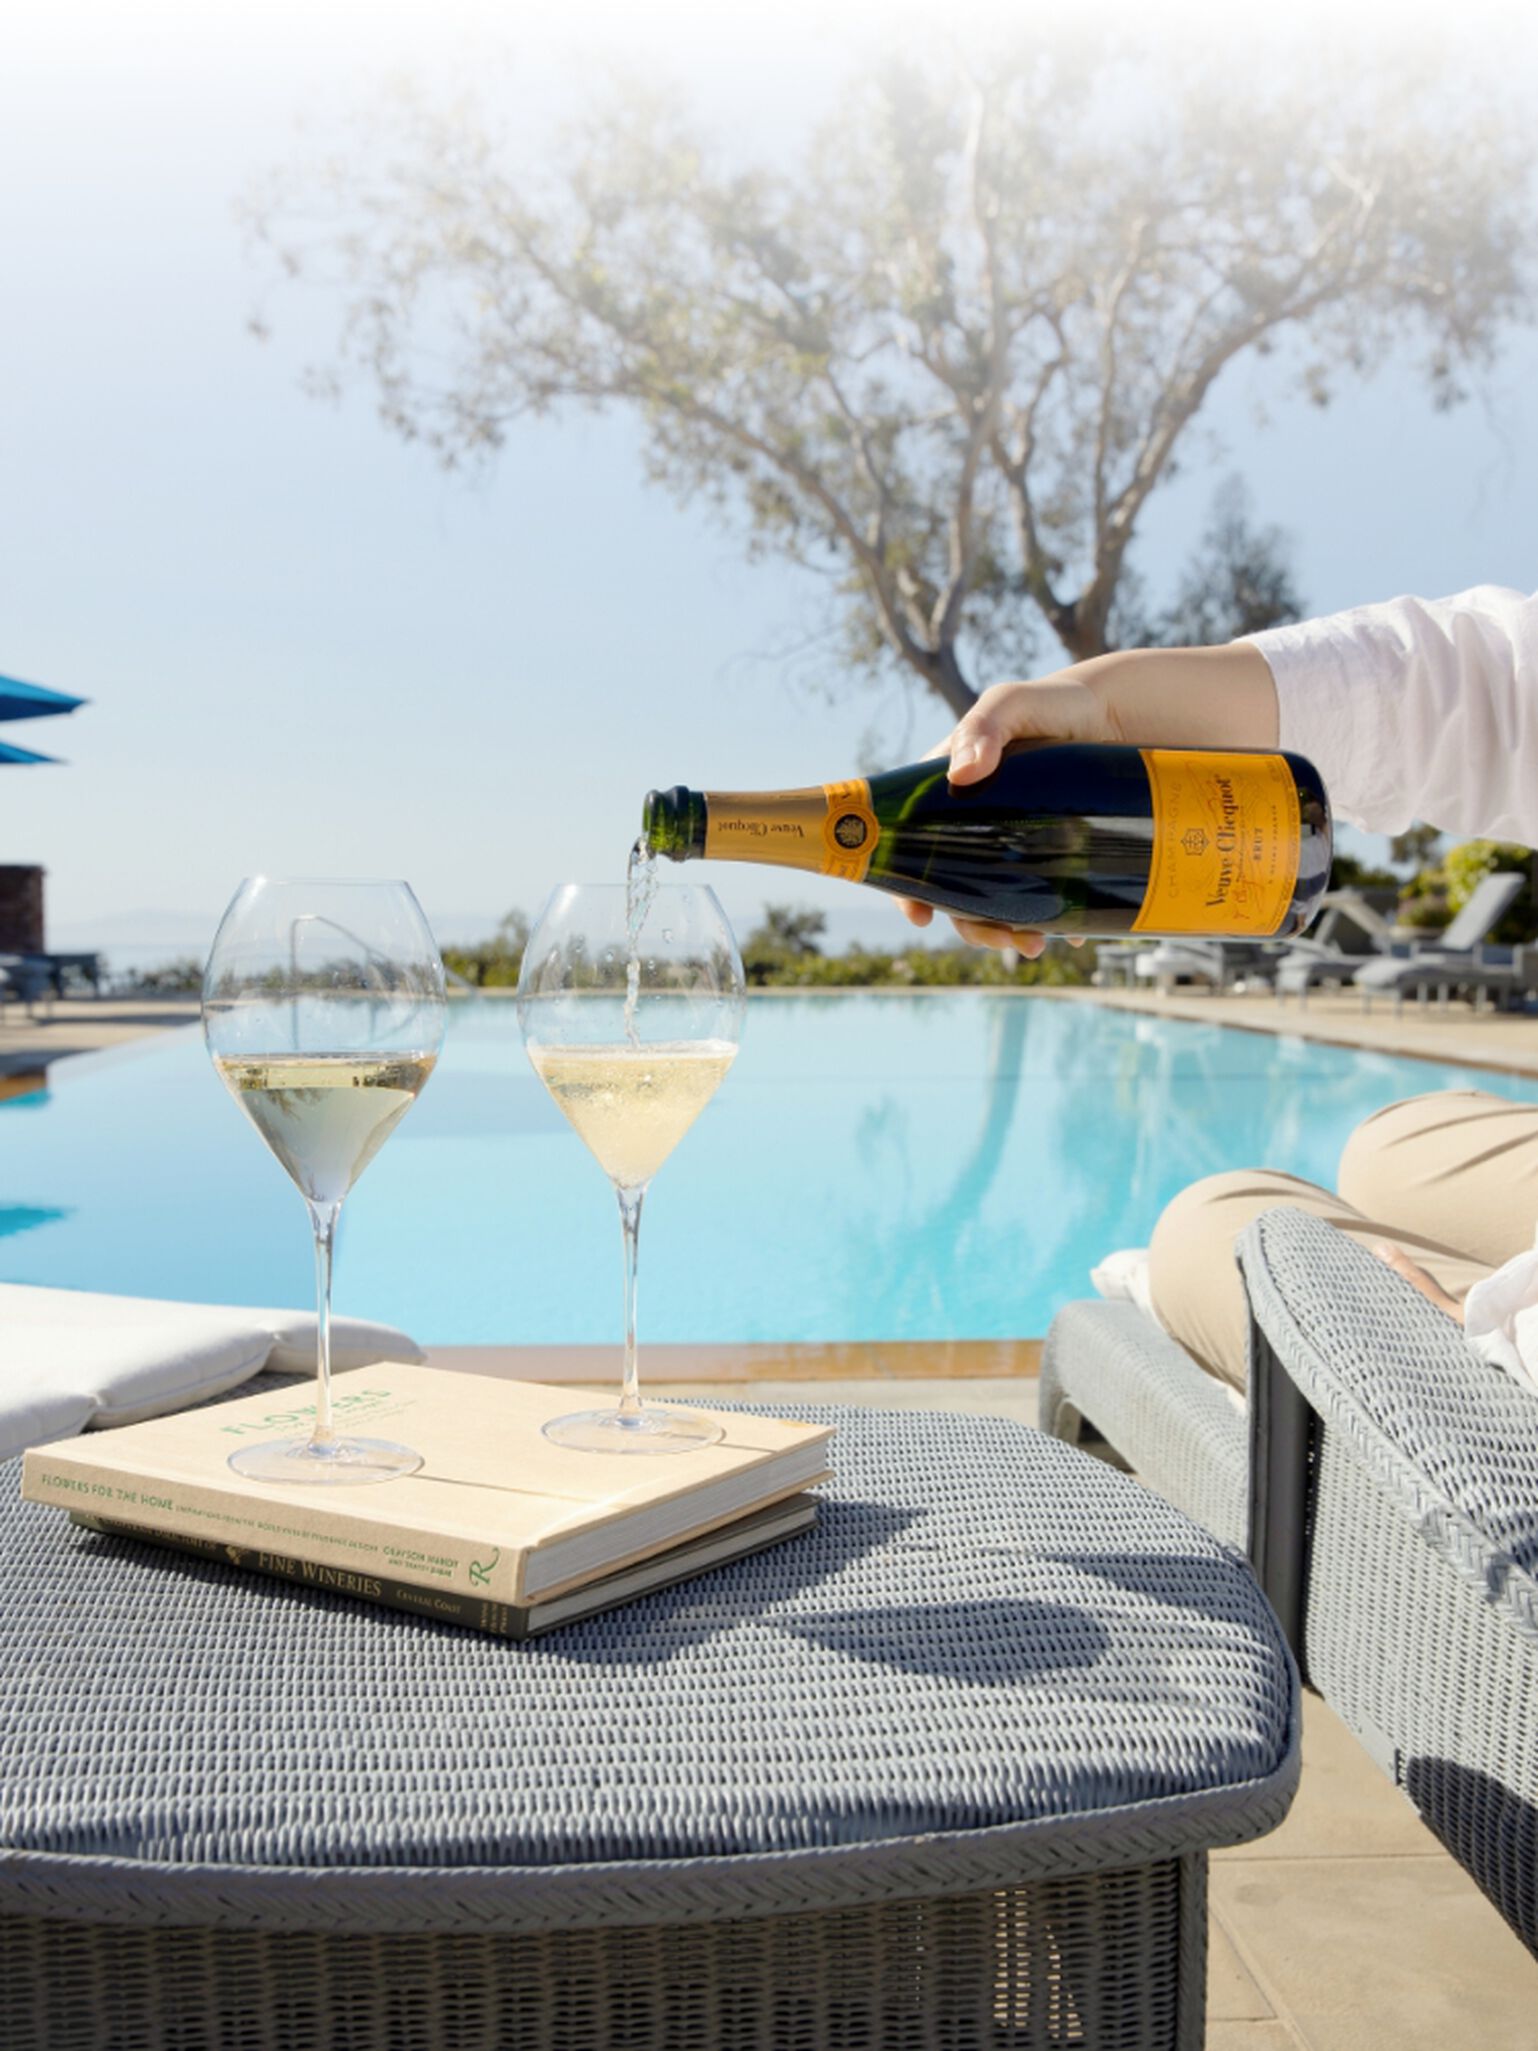 A bottle of Veuve Clicquot being poured into flute glasses poolside